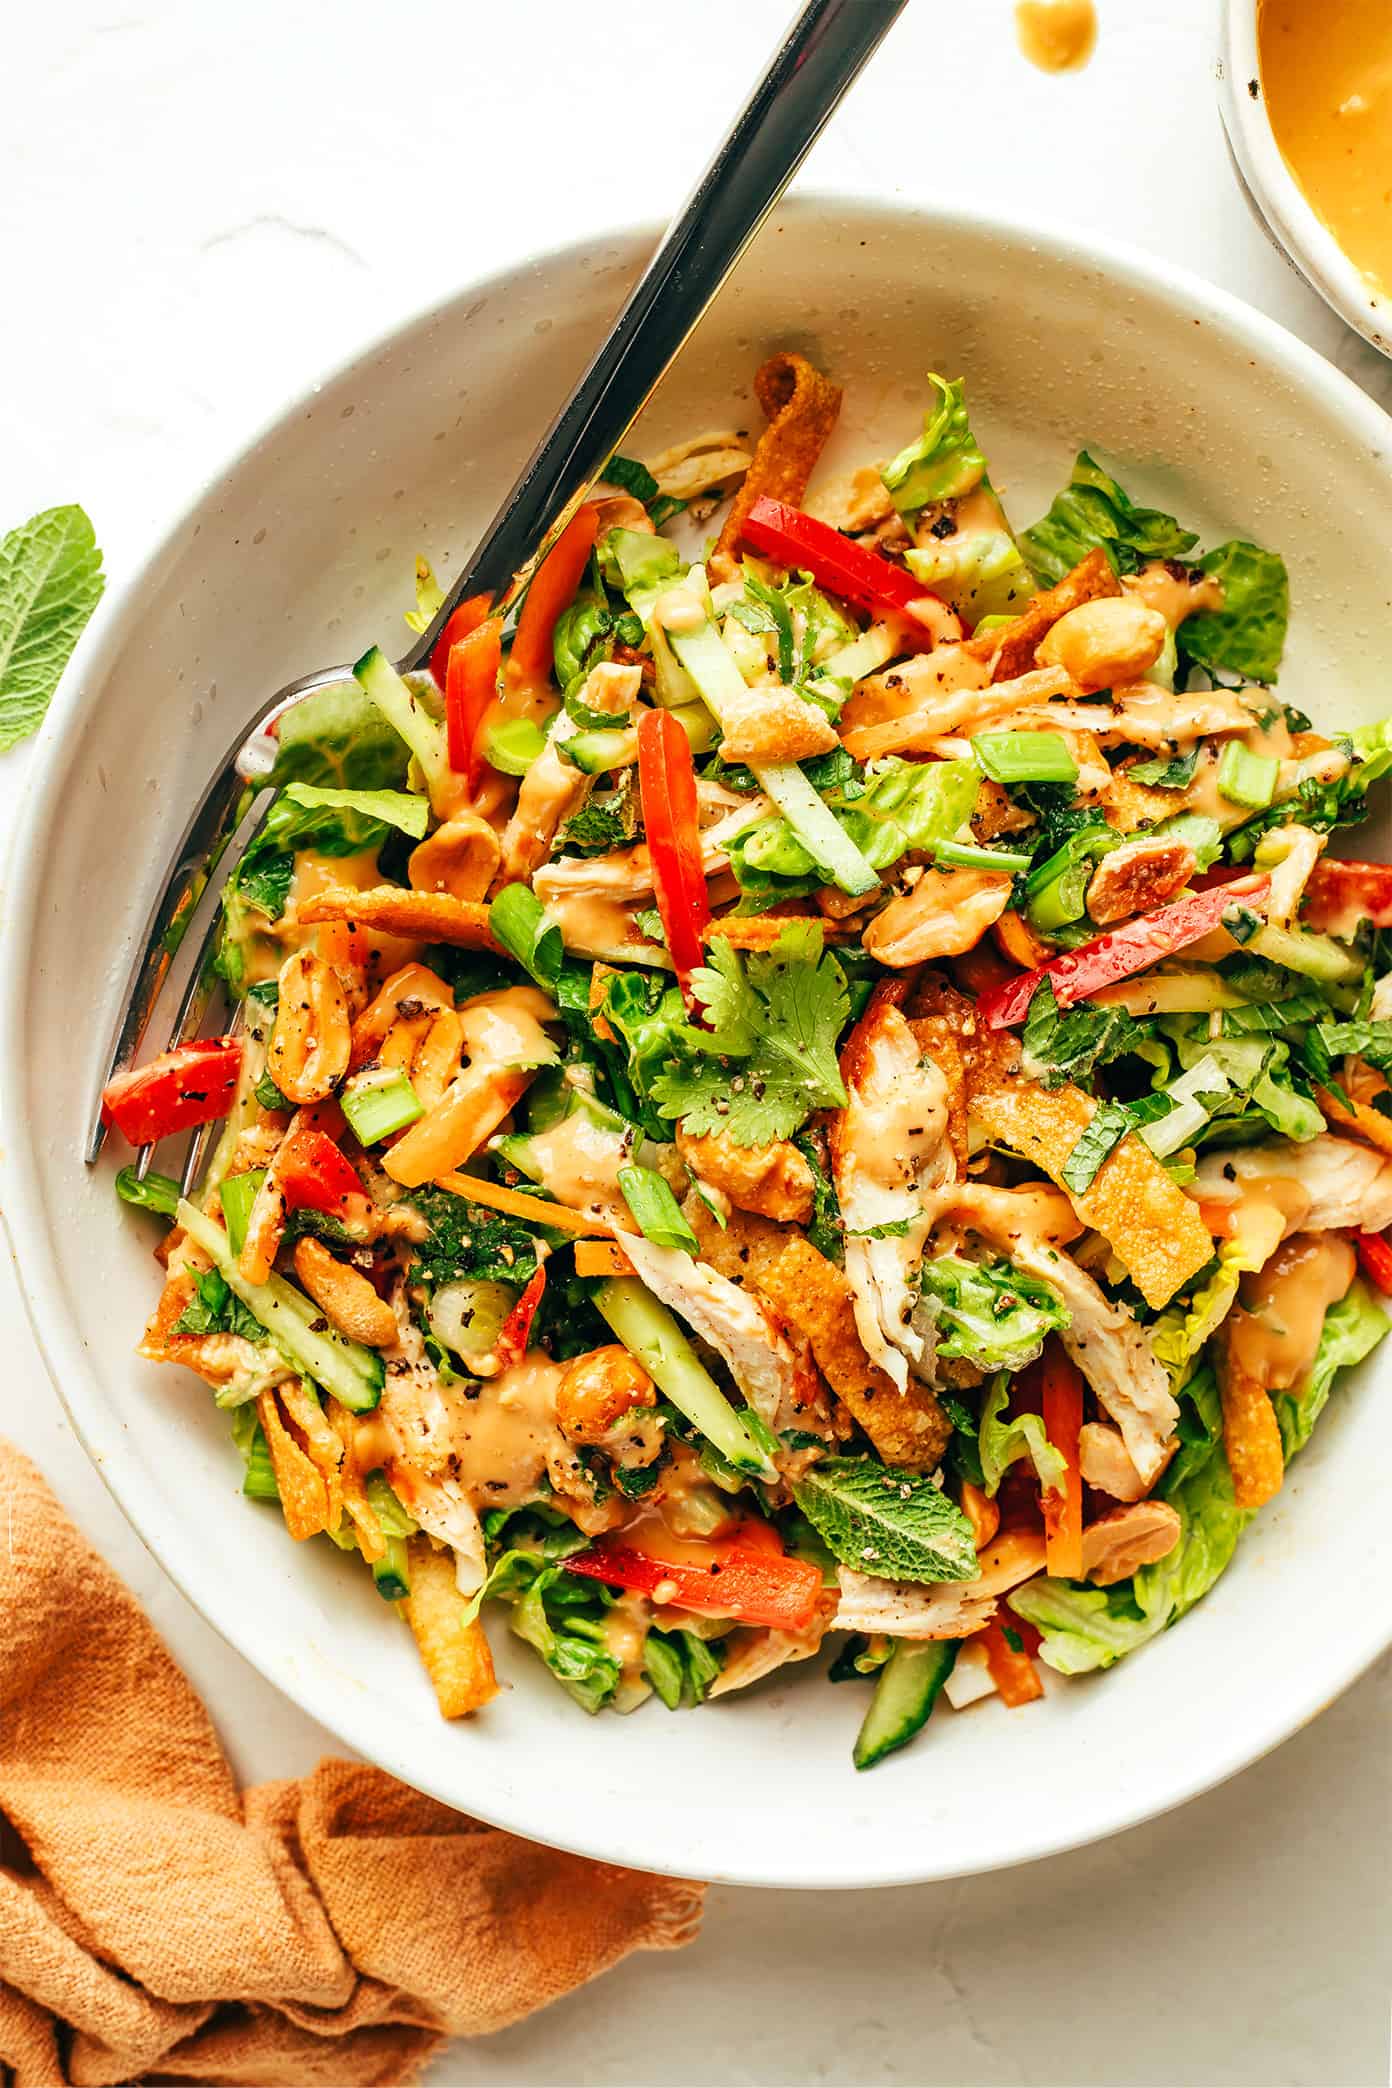 Thai Crunch Salad drizzled with peanut dressing in bowl with fork